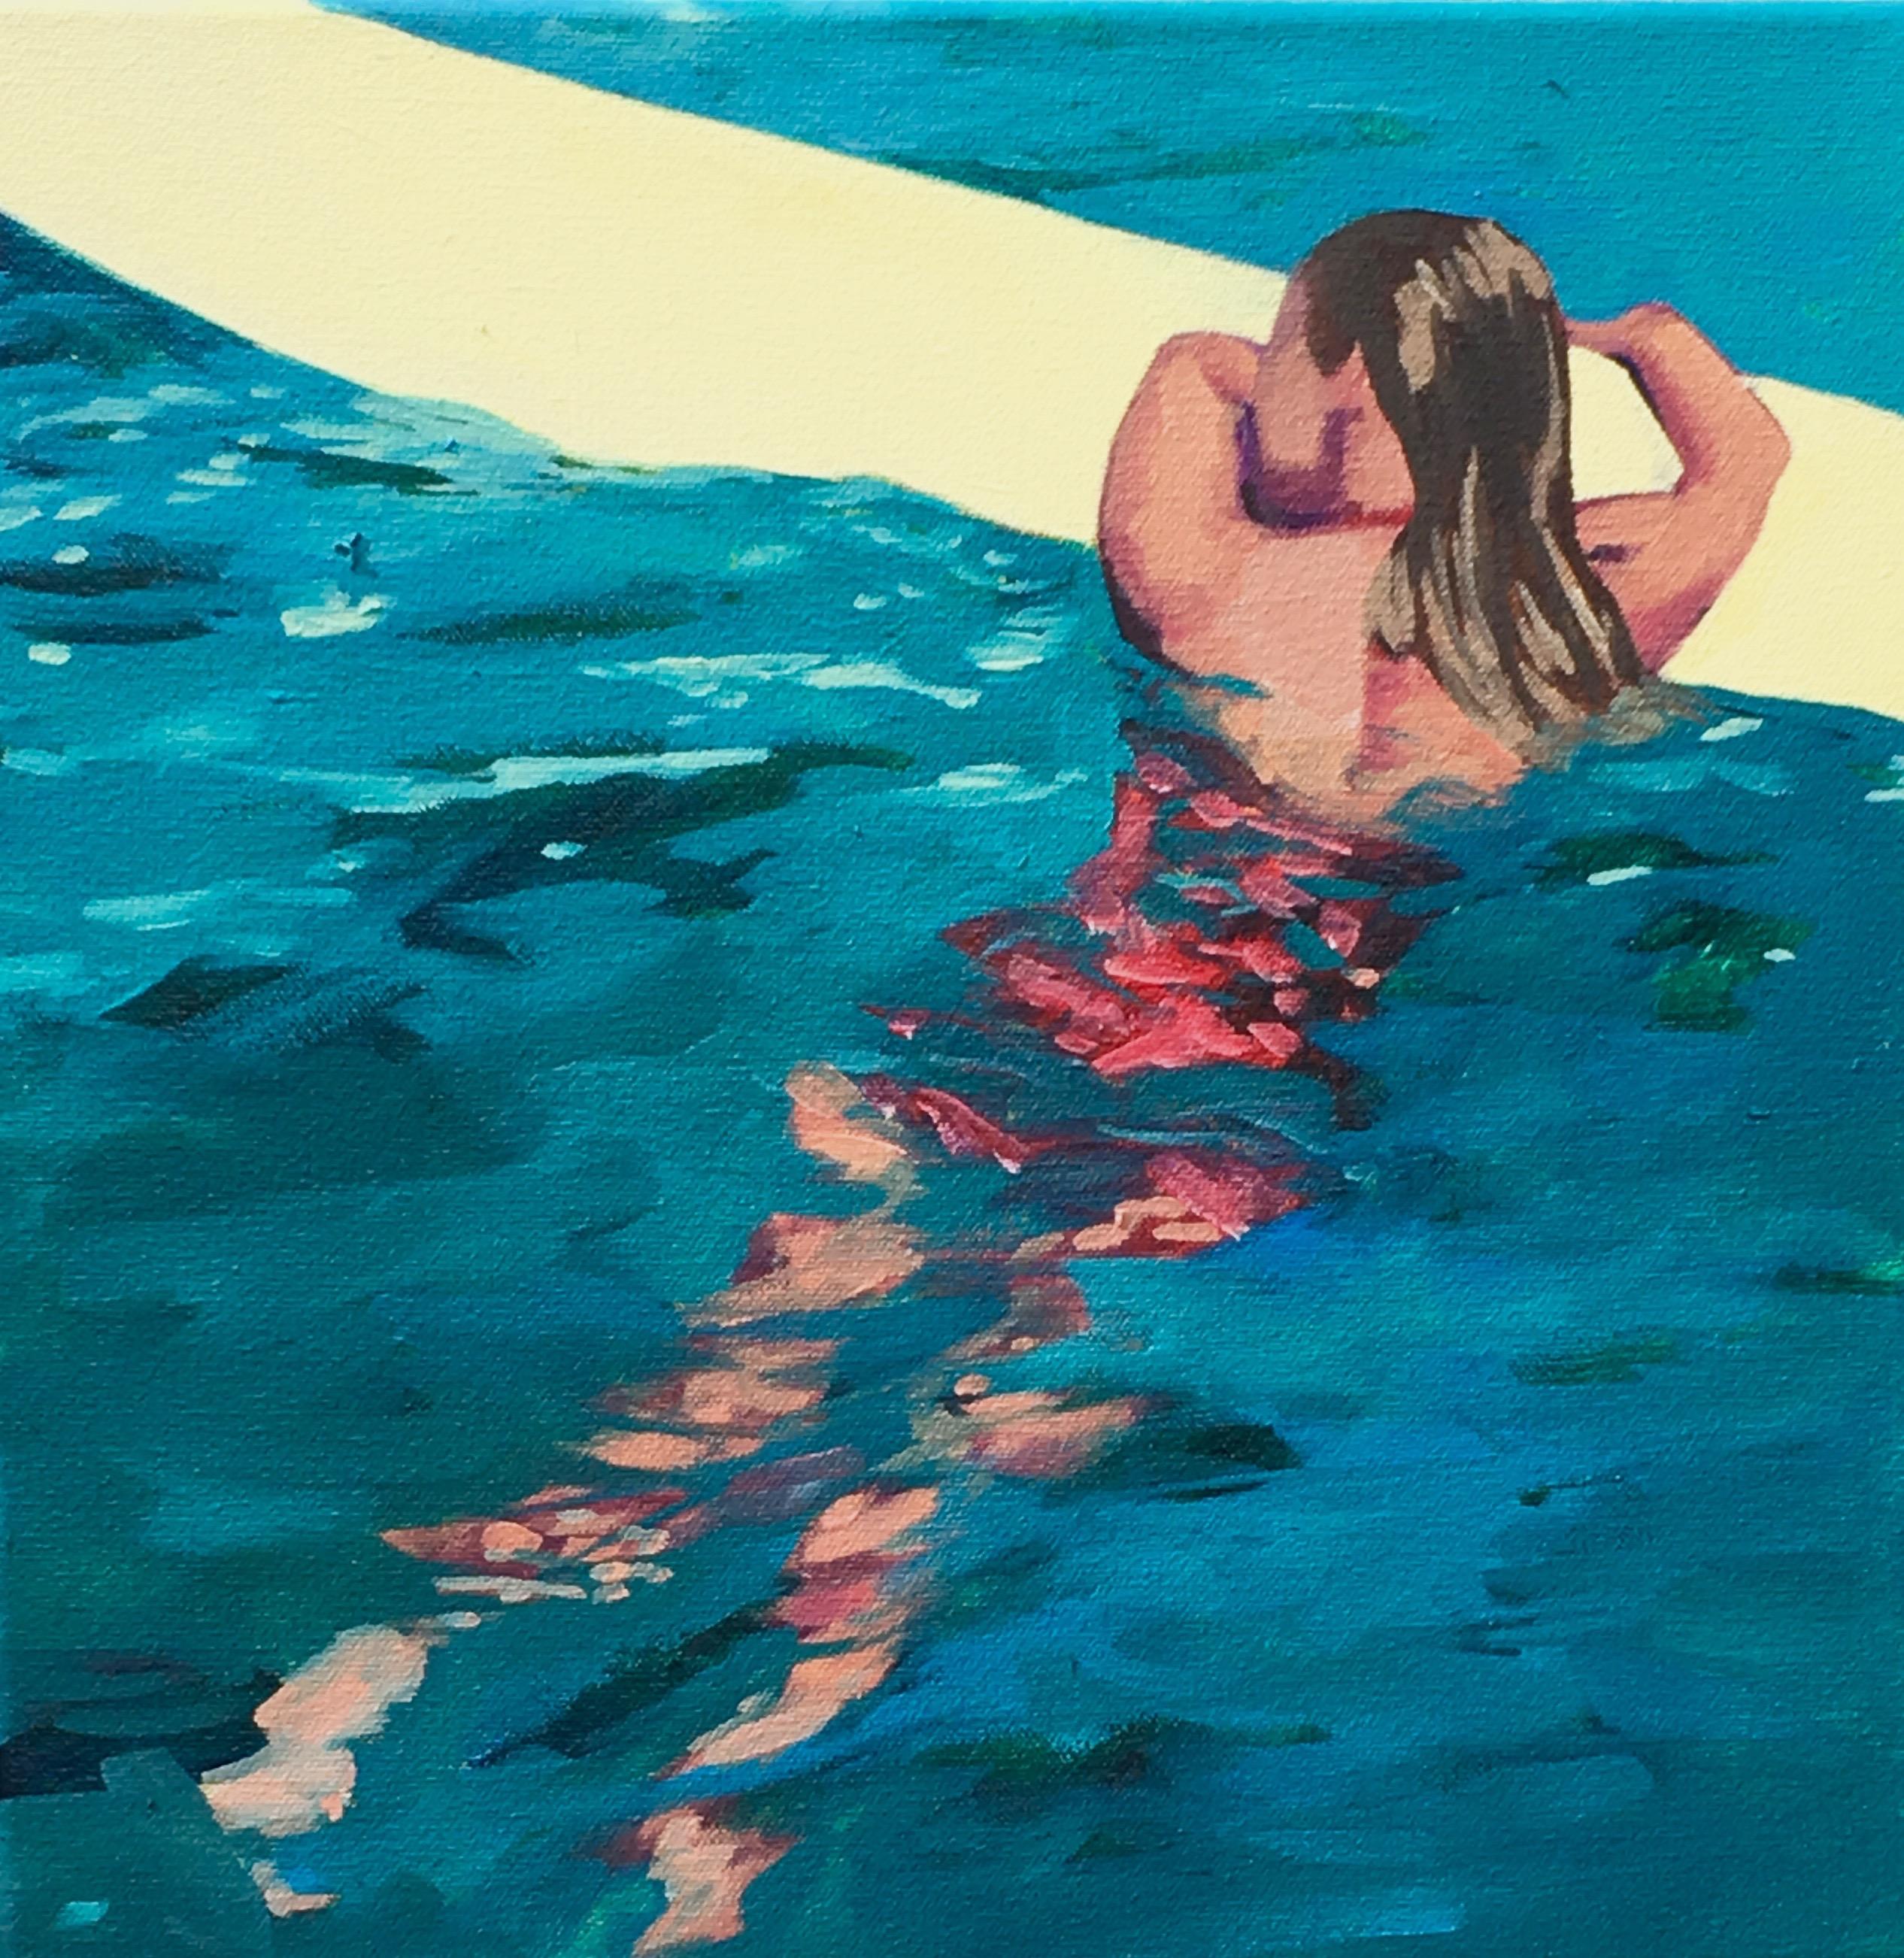 T.S. Harris Figurative Painting - "Surfer Girl" Oil painting of a girl floating on a surf board in teal water 